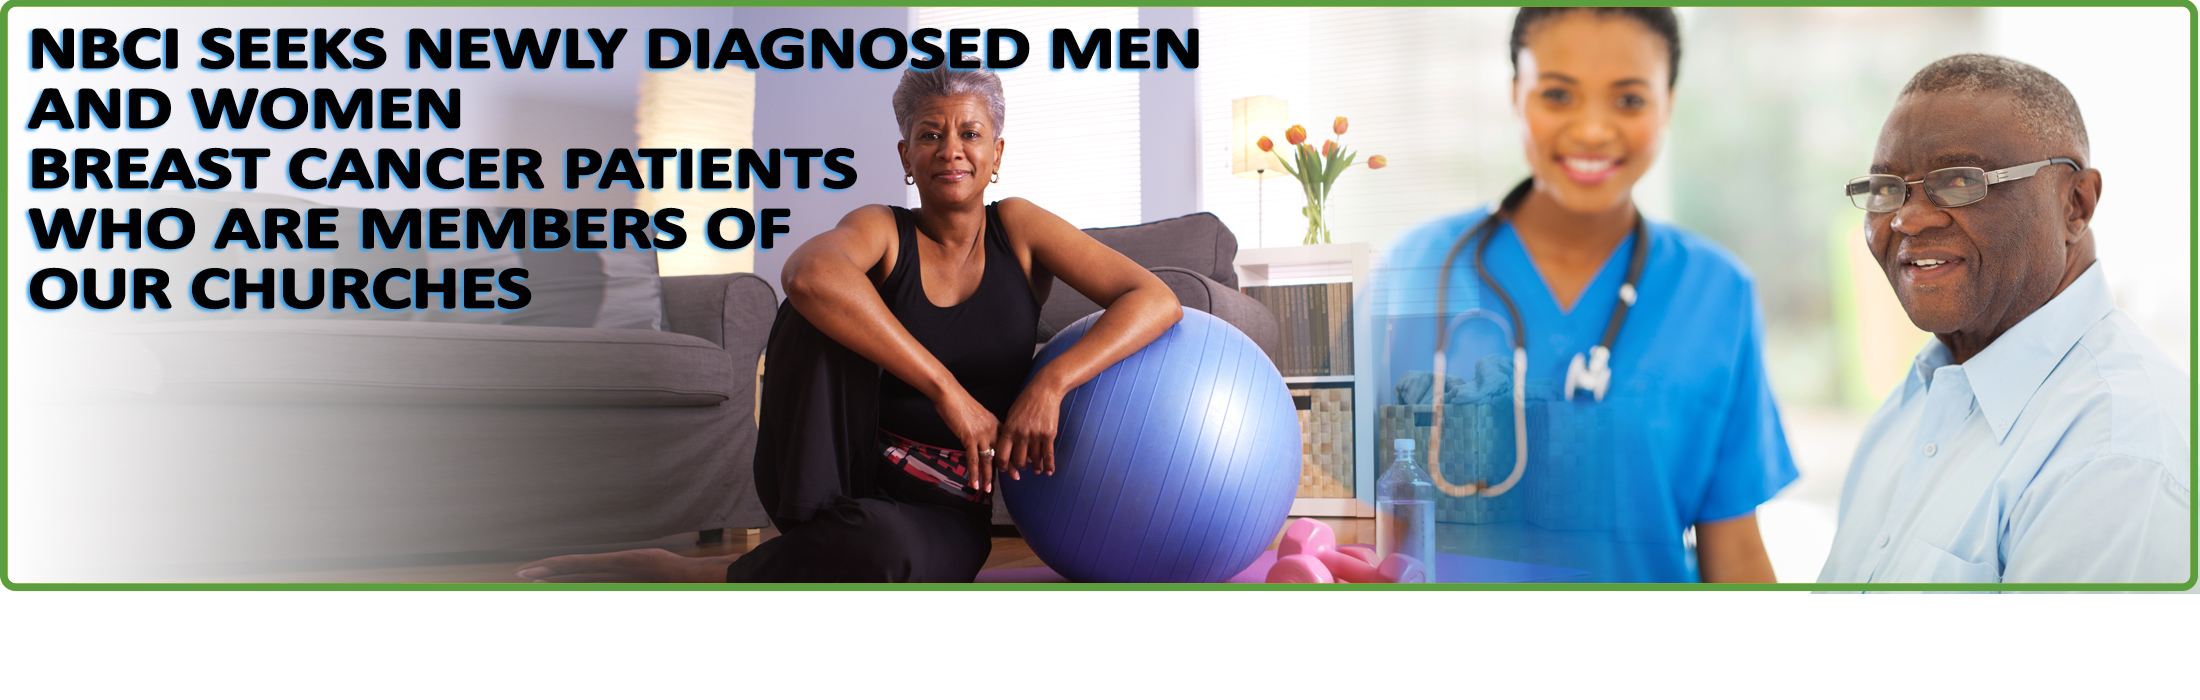 NBCI Seeks Newly Diagnosed Men and Women Breast Cancer Patients Who Are Members of Our Churches